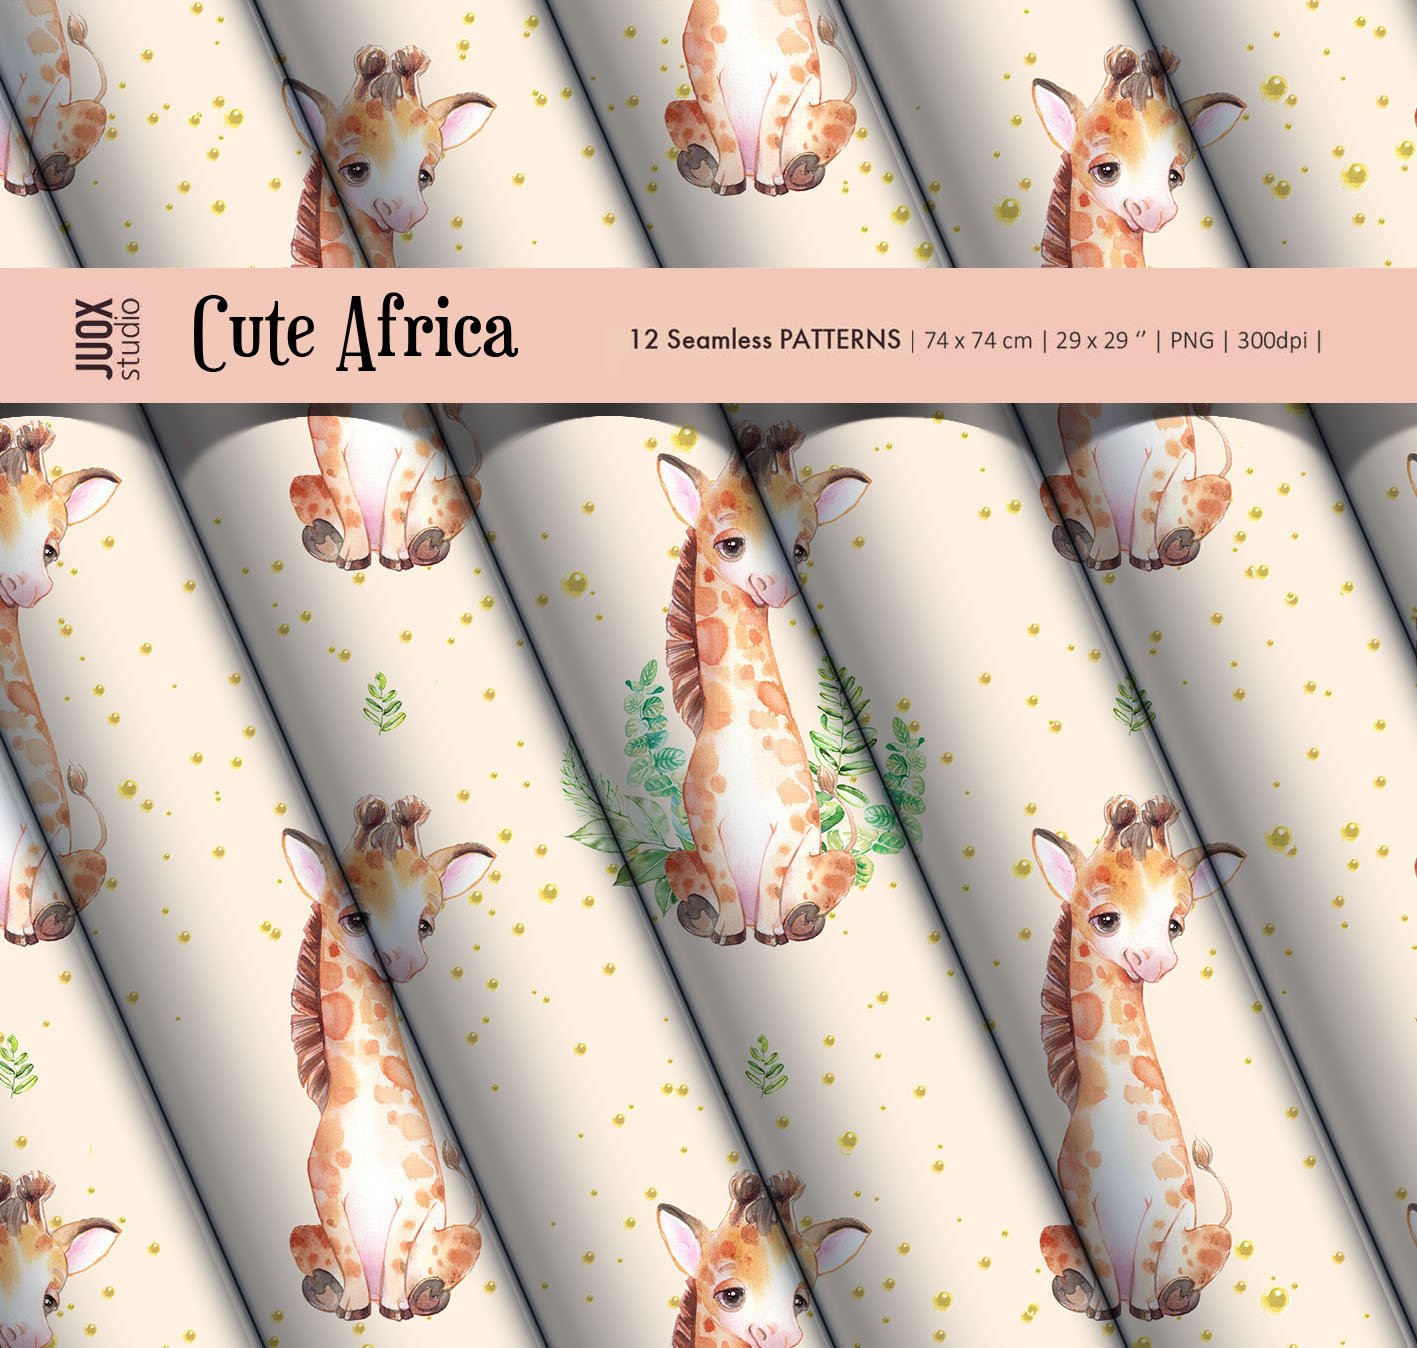 Cute Africa Patterns & Elements.